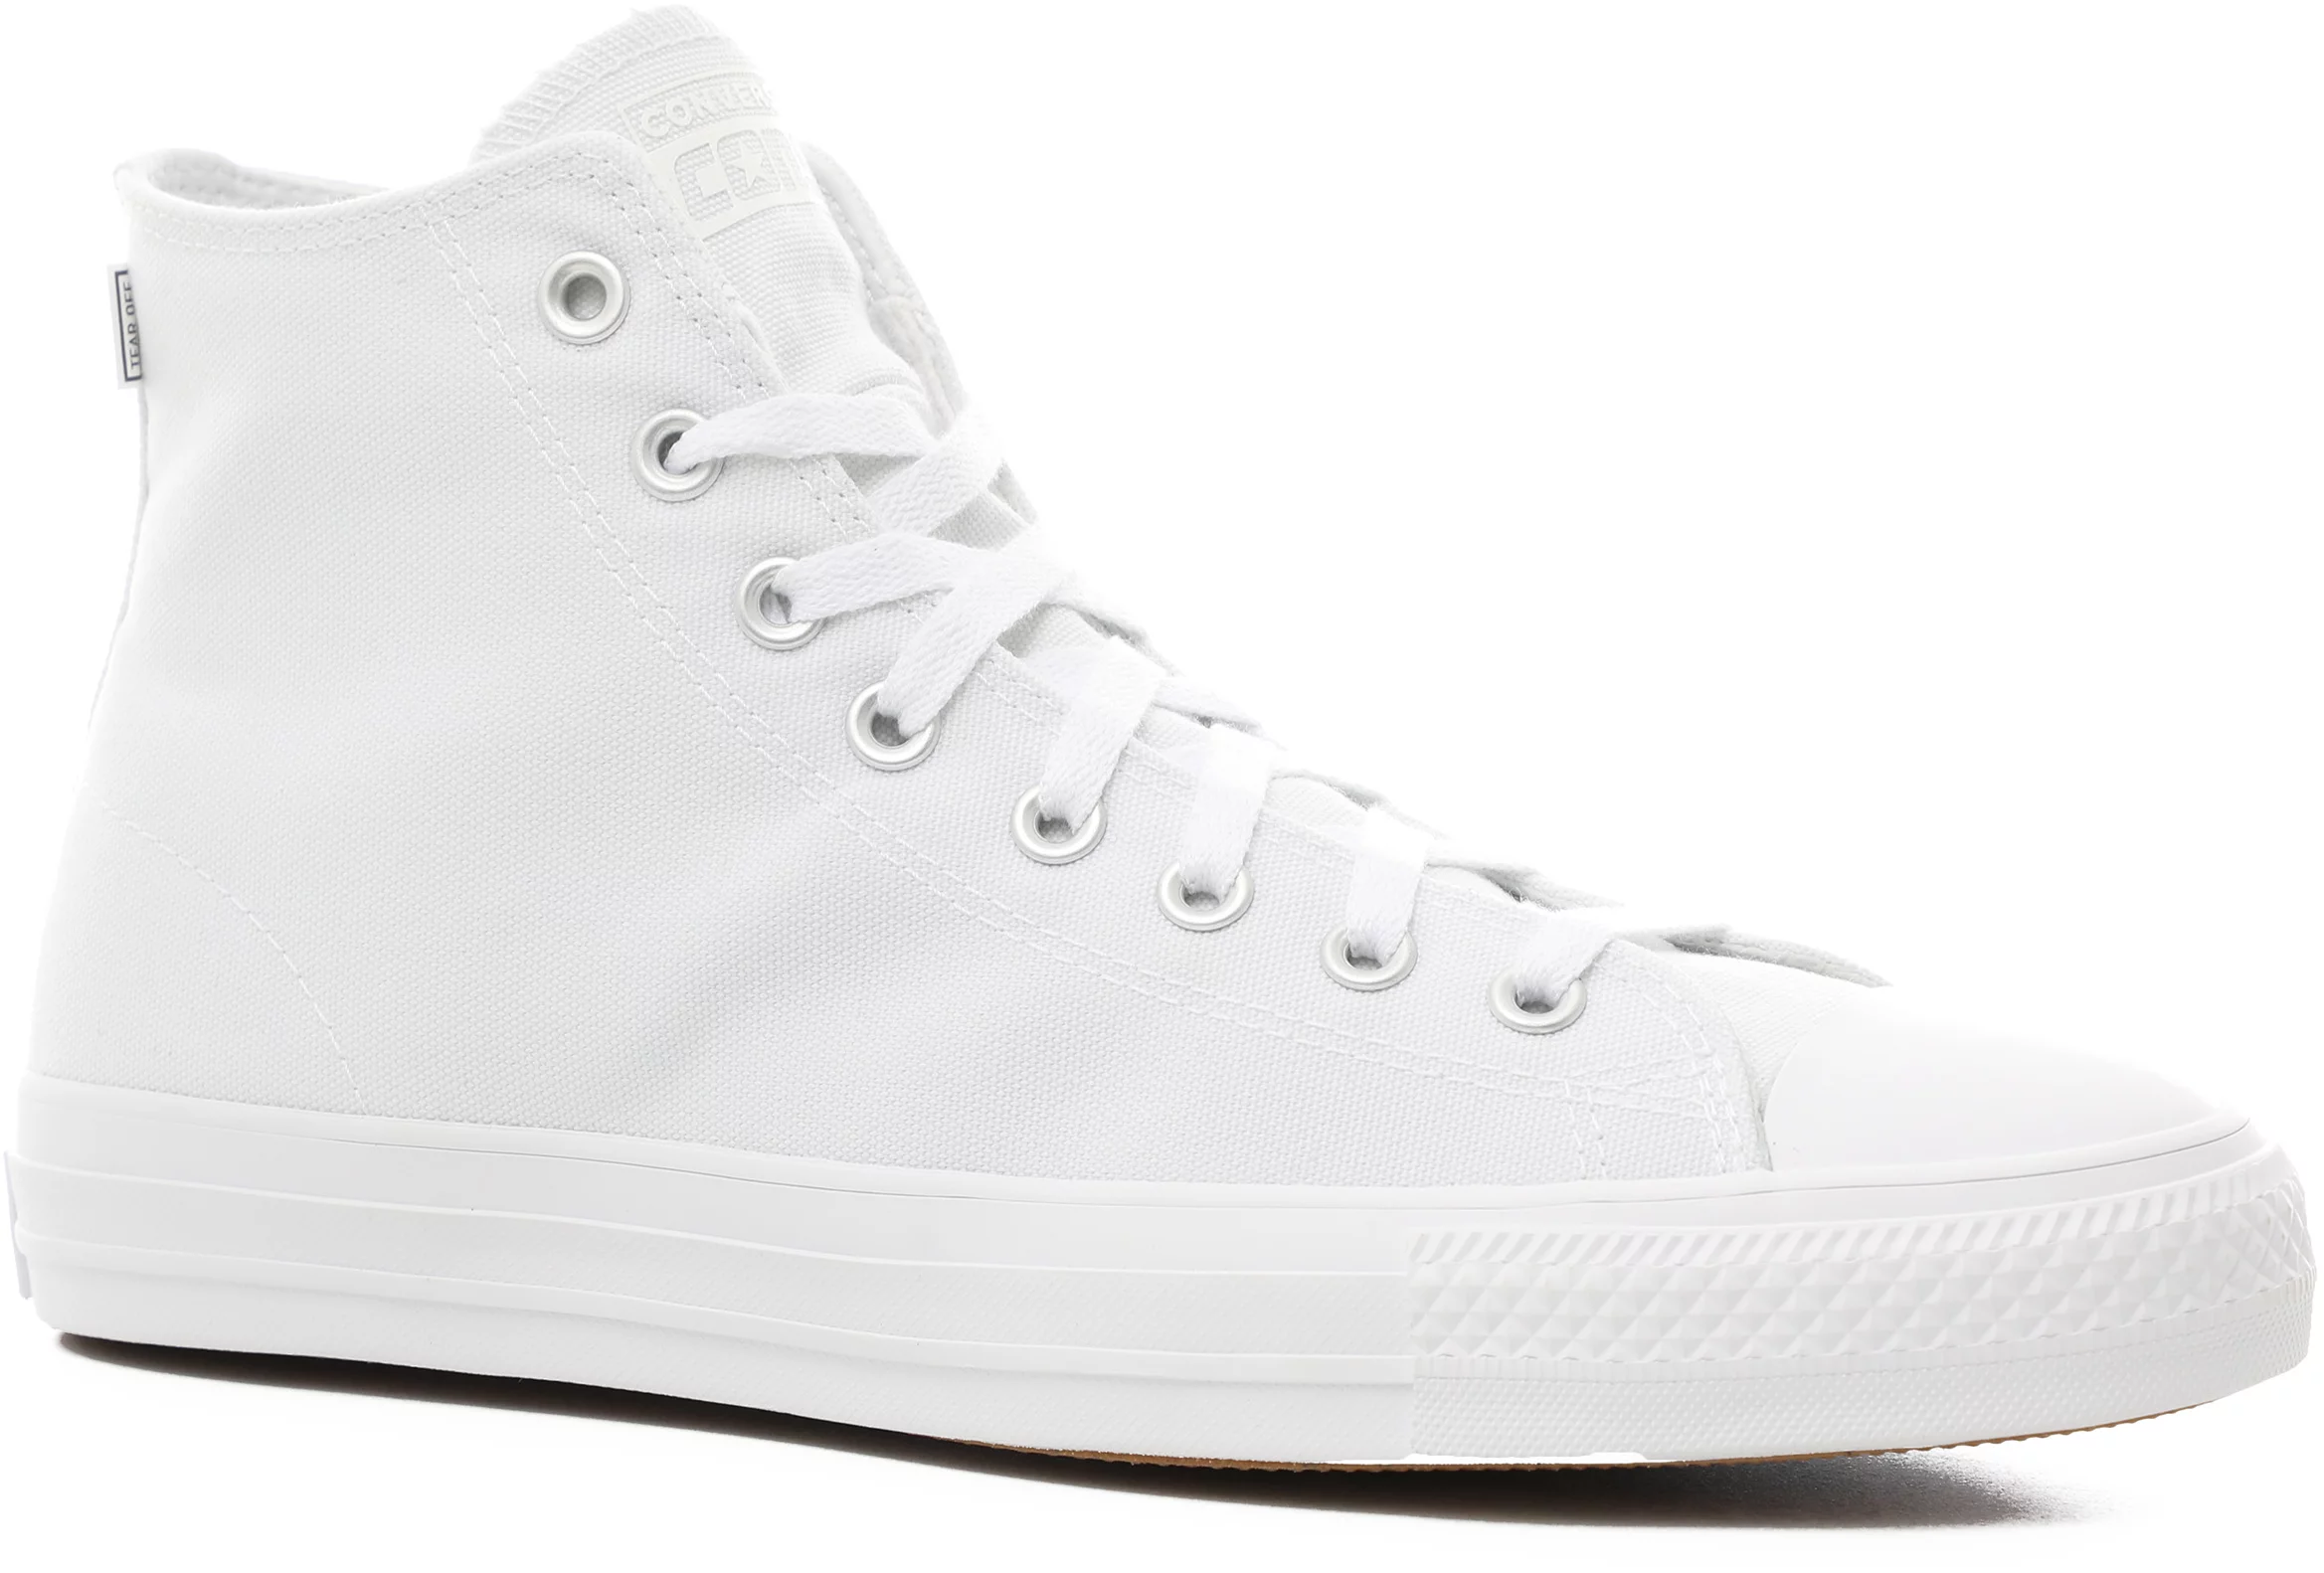 Converse Chuck Taylor All Star High Skate Shoes - Free Shipping |